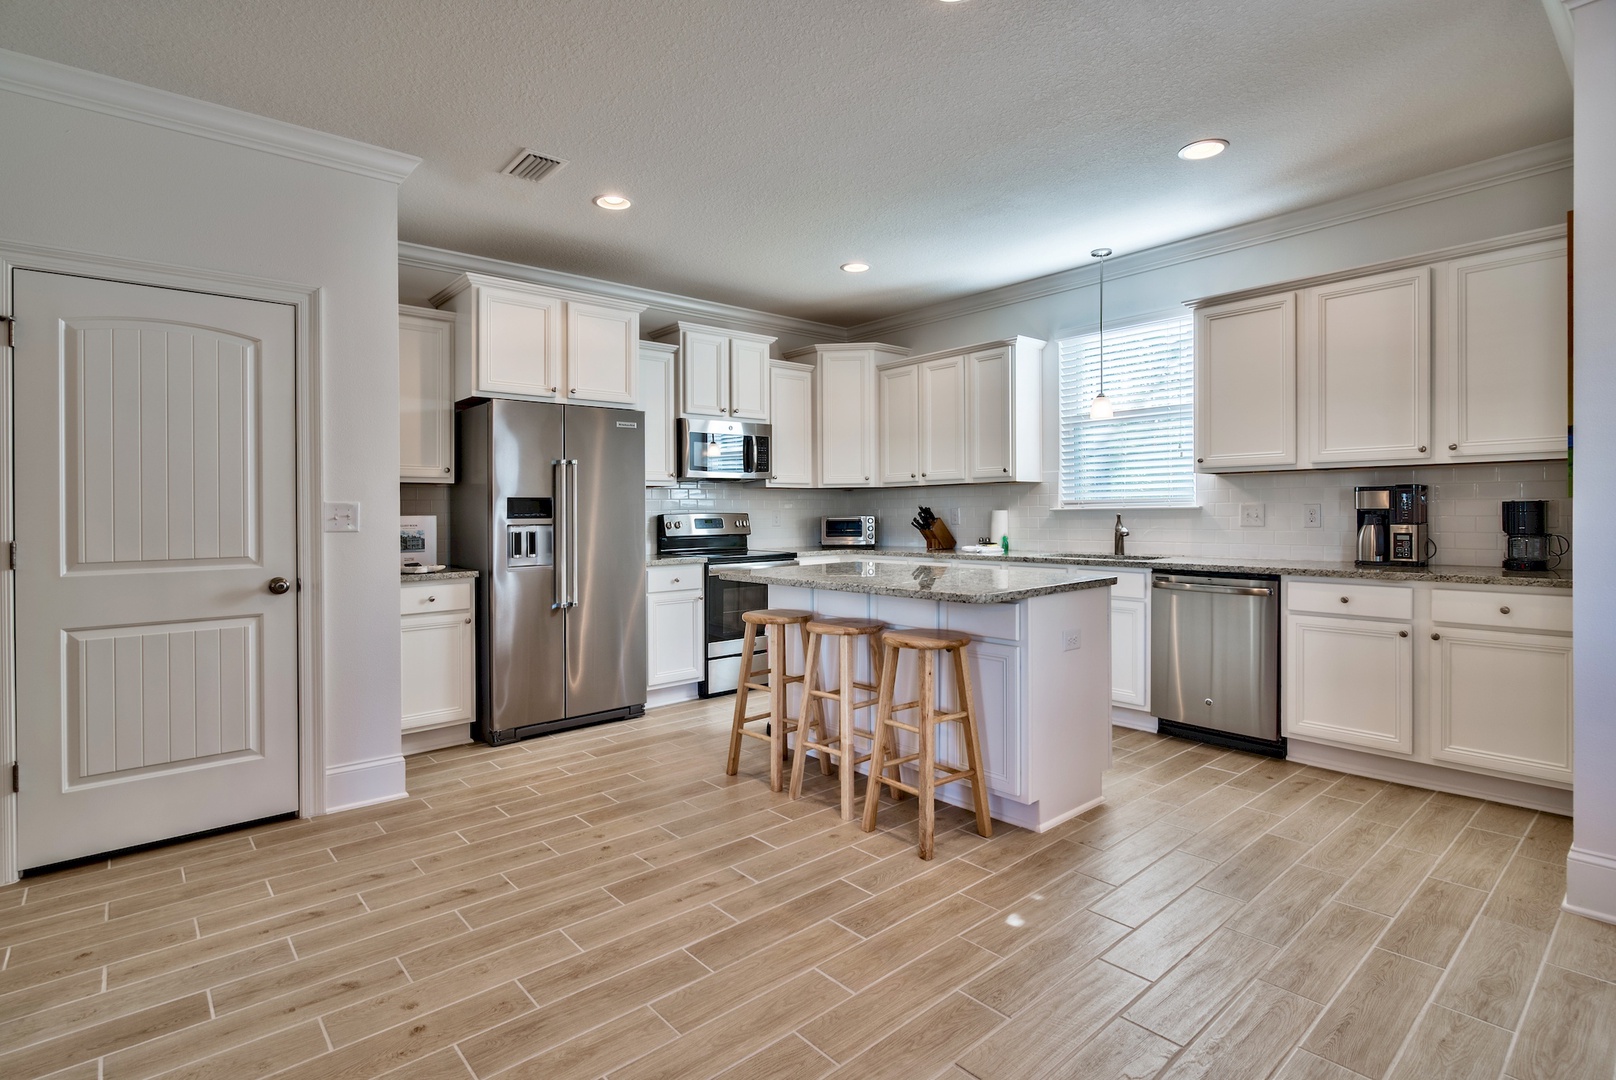 The spacious kitchen is perfect for preparing family meals!